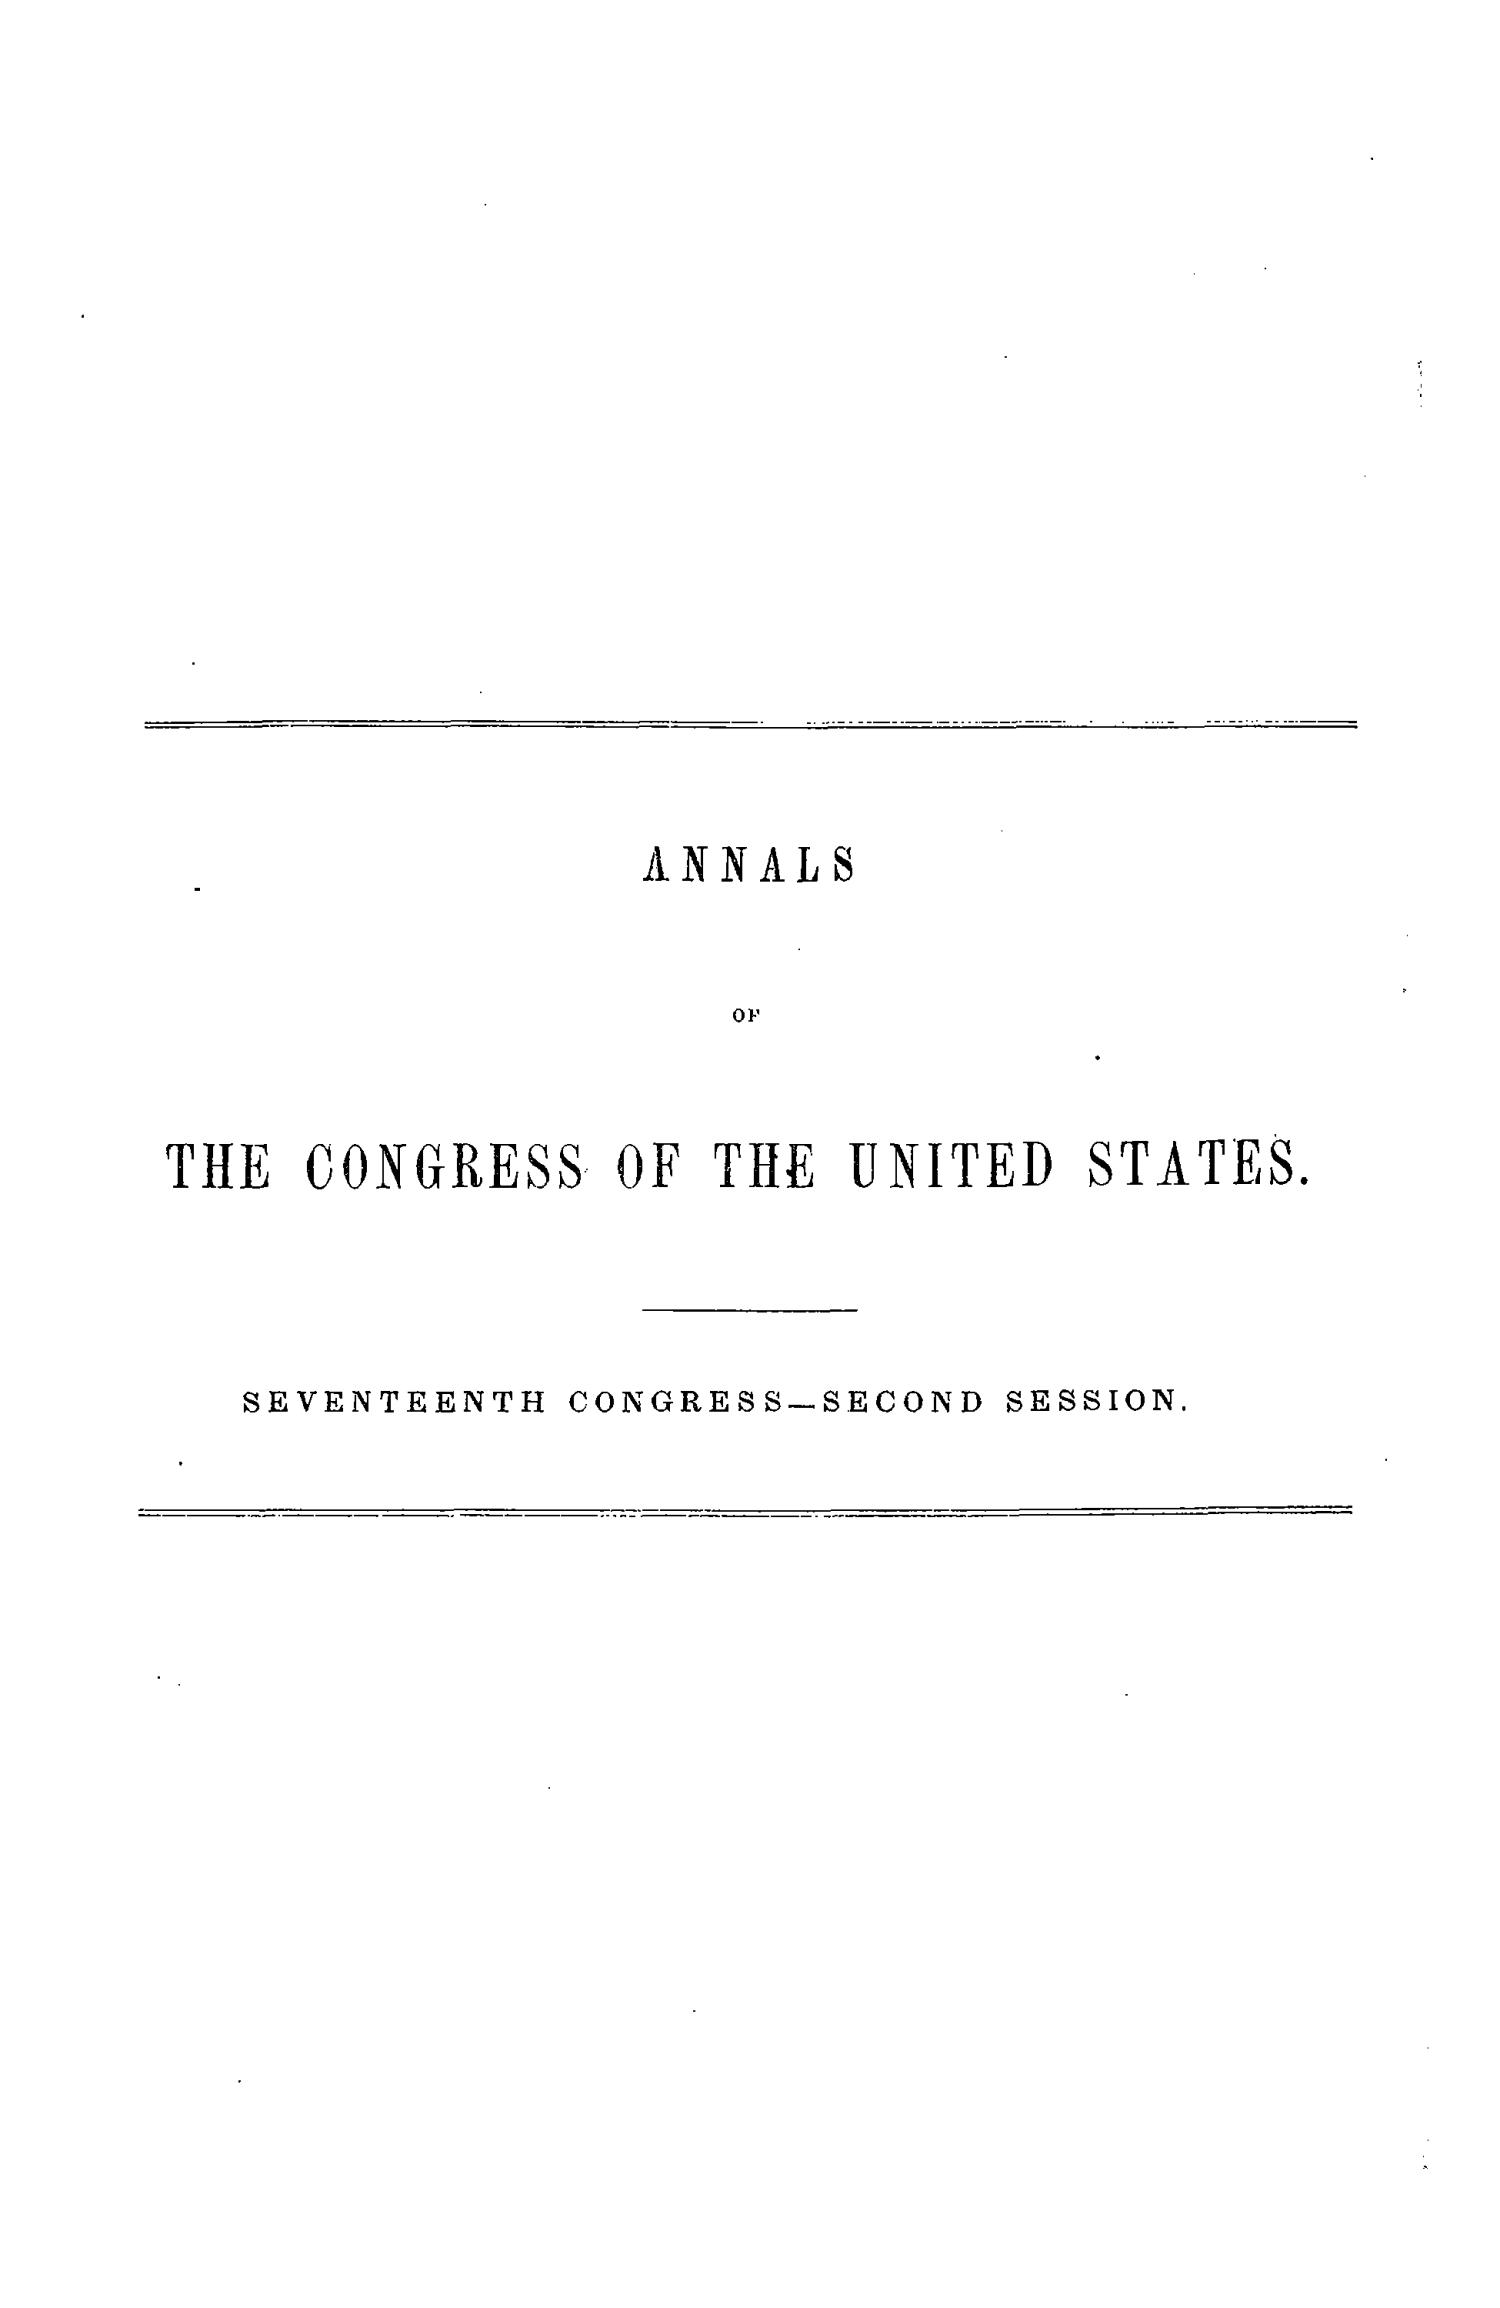 The Debates and Proceedings in the Congress of the United States, Seventeenth Congress, Second Session
                                                
                                                    None
                                                